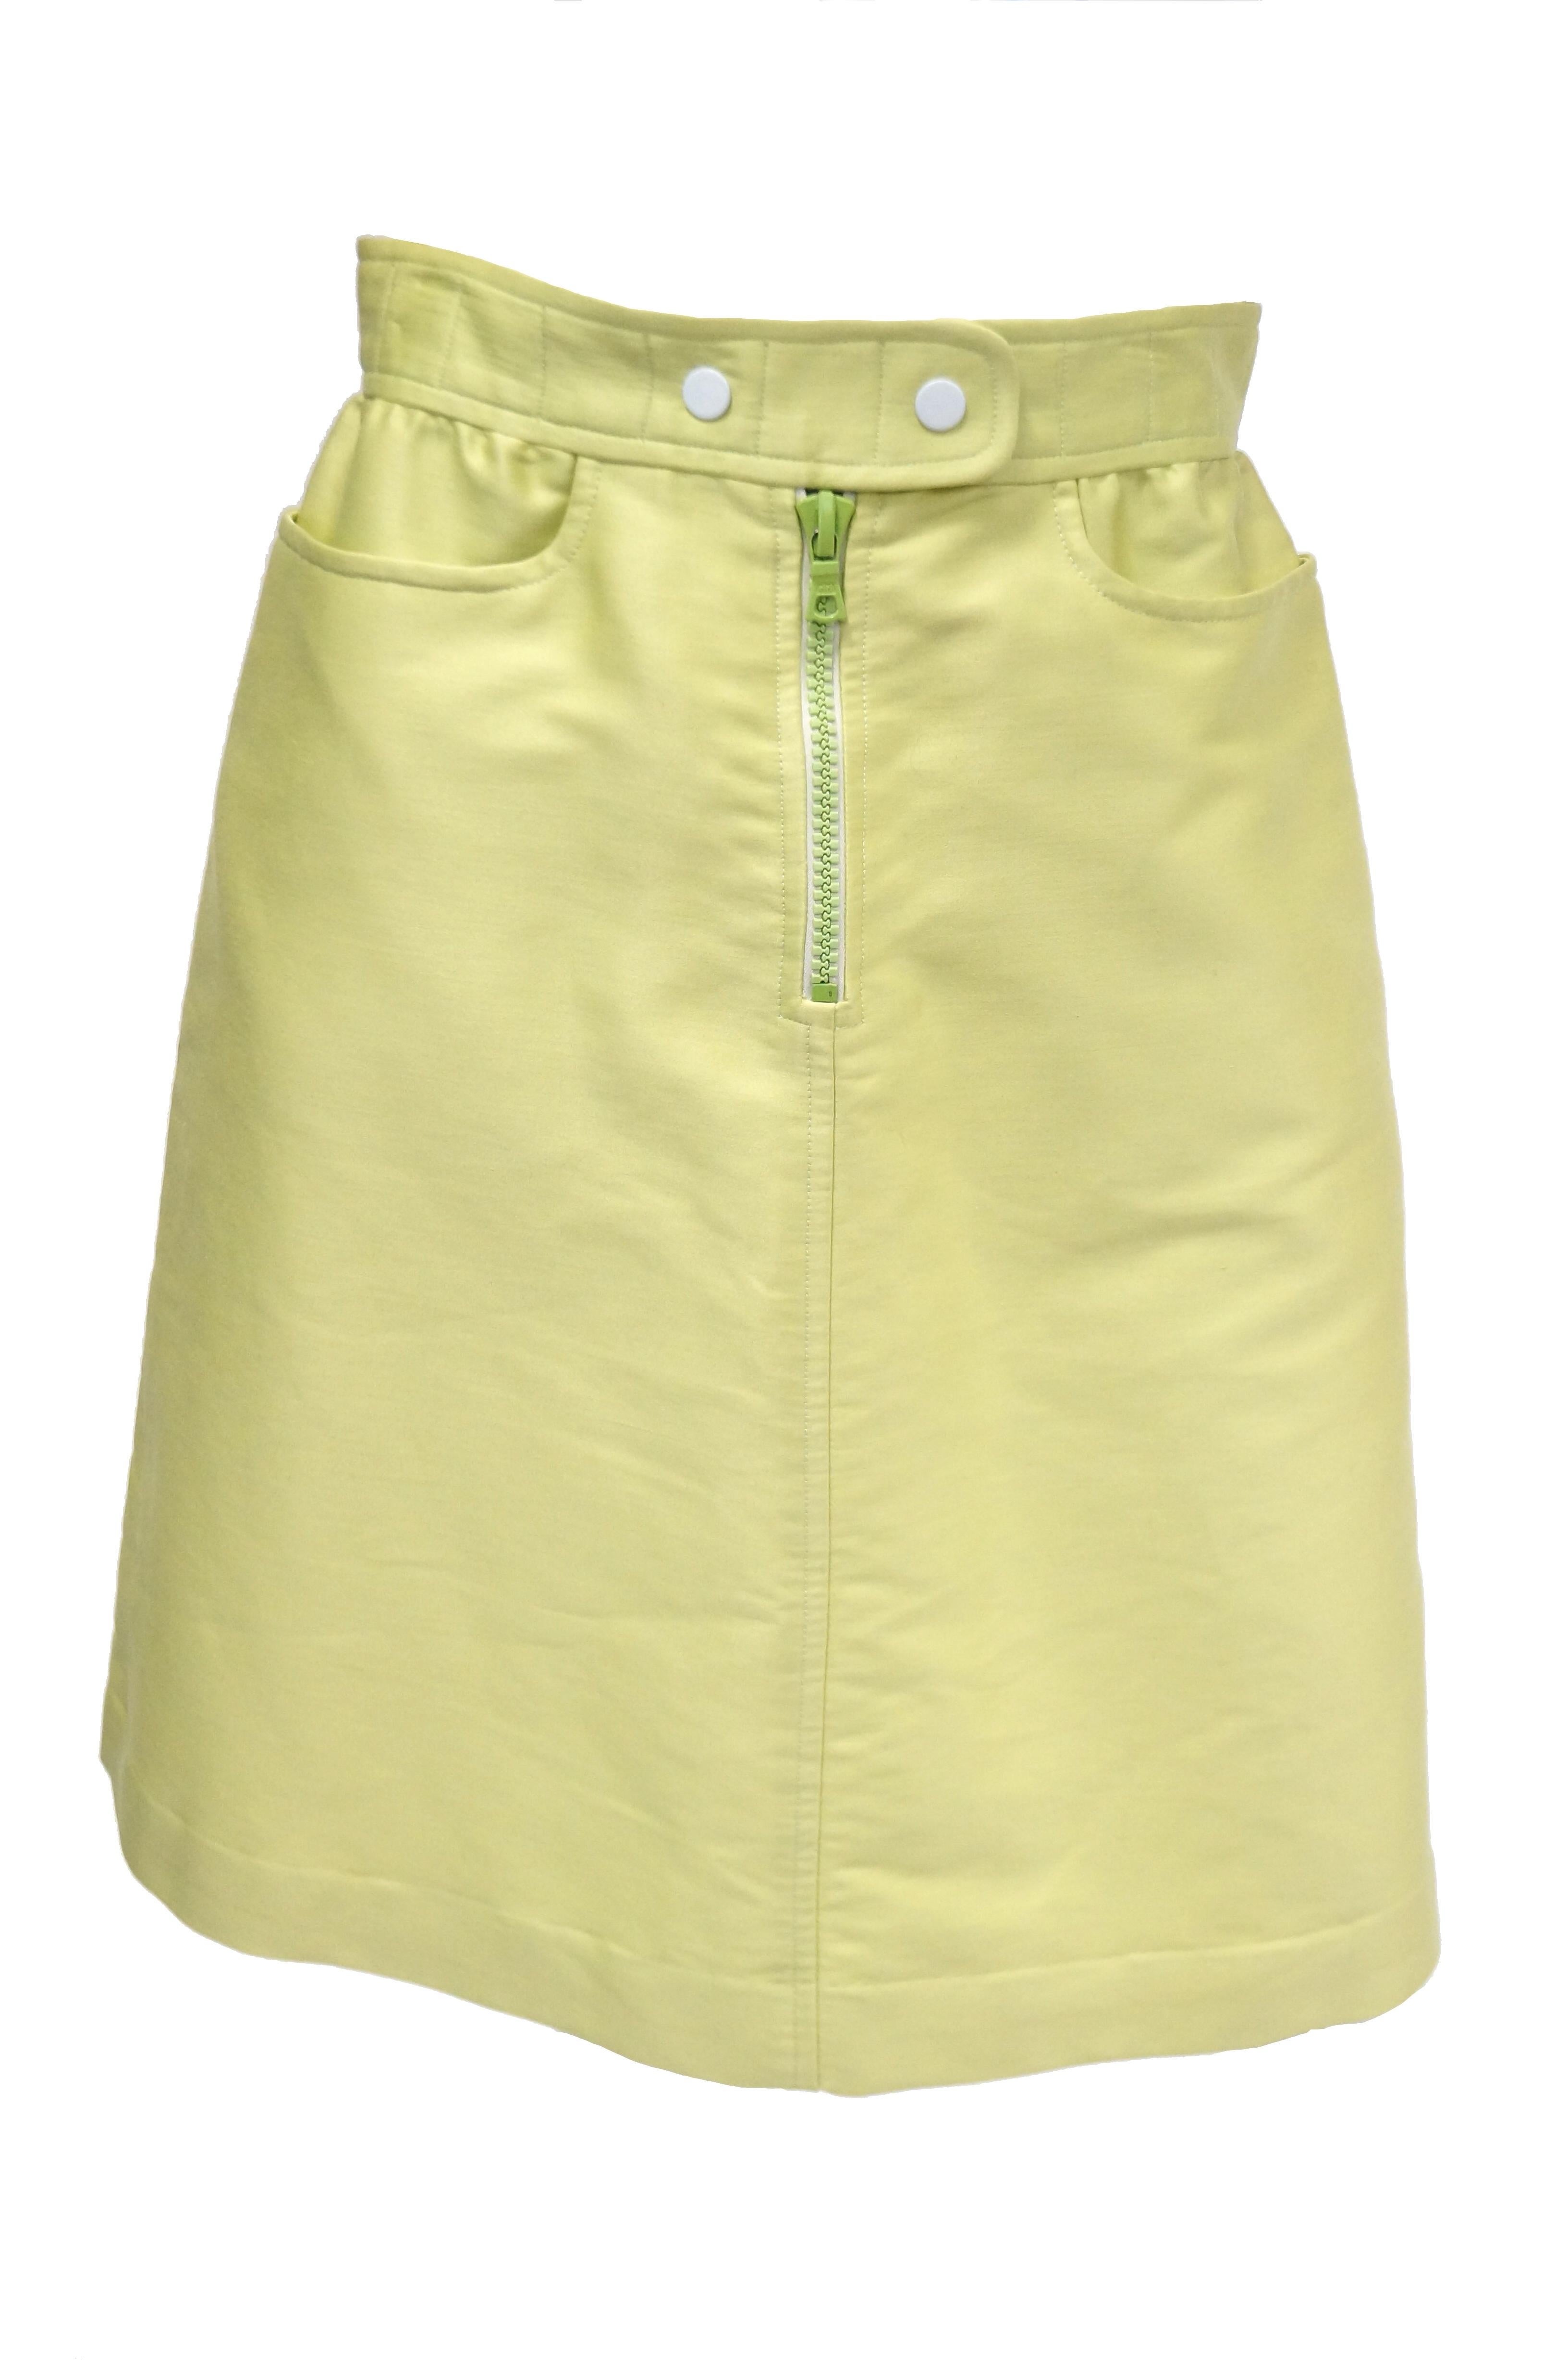 1990s Courreges Green Mod Mini Skirt with White Accent Zipper 2